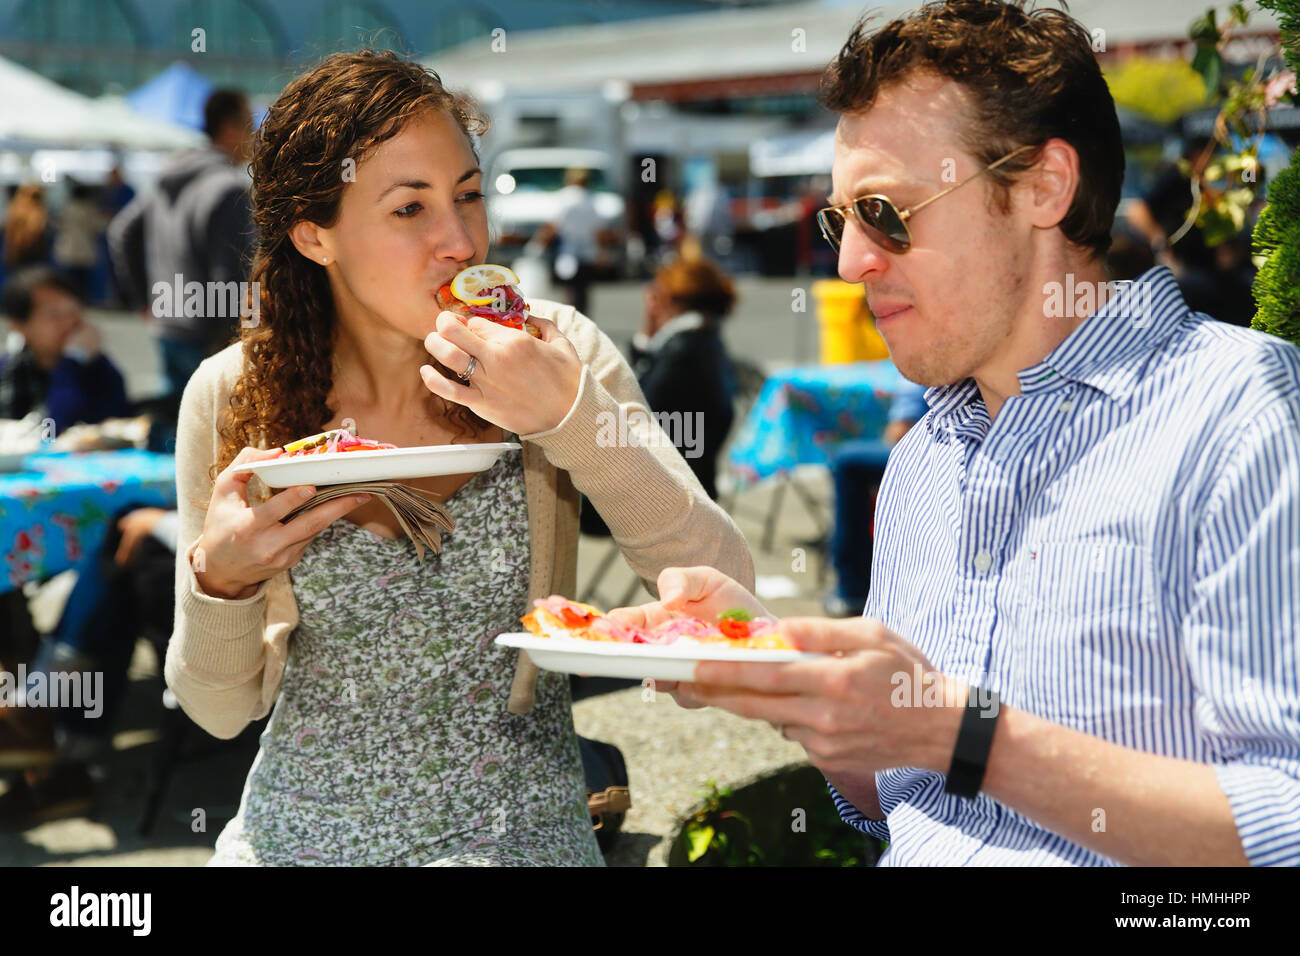 Close Up View of a Young Couple Eating Street Food, San Francisco, California Stock Photo